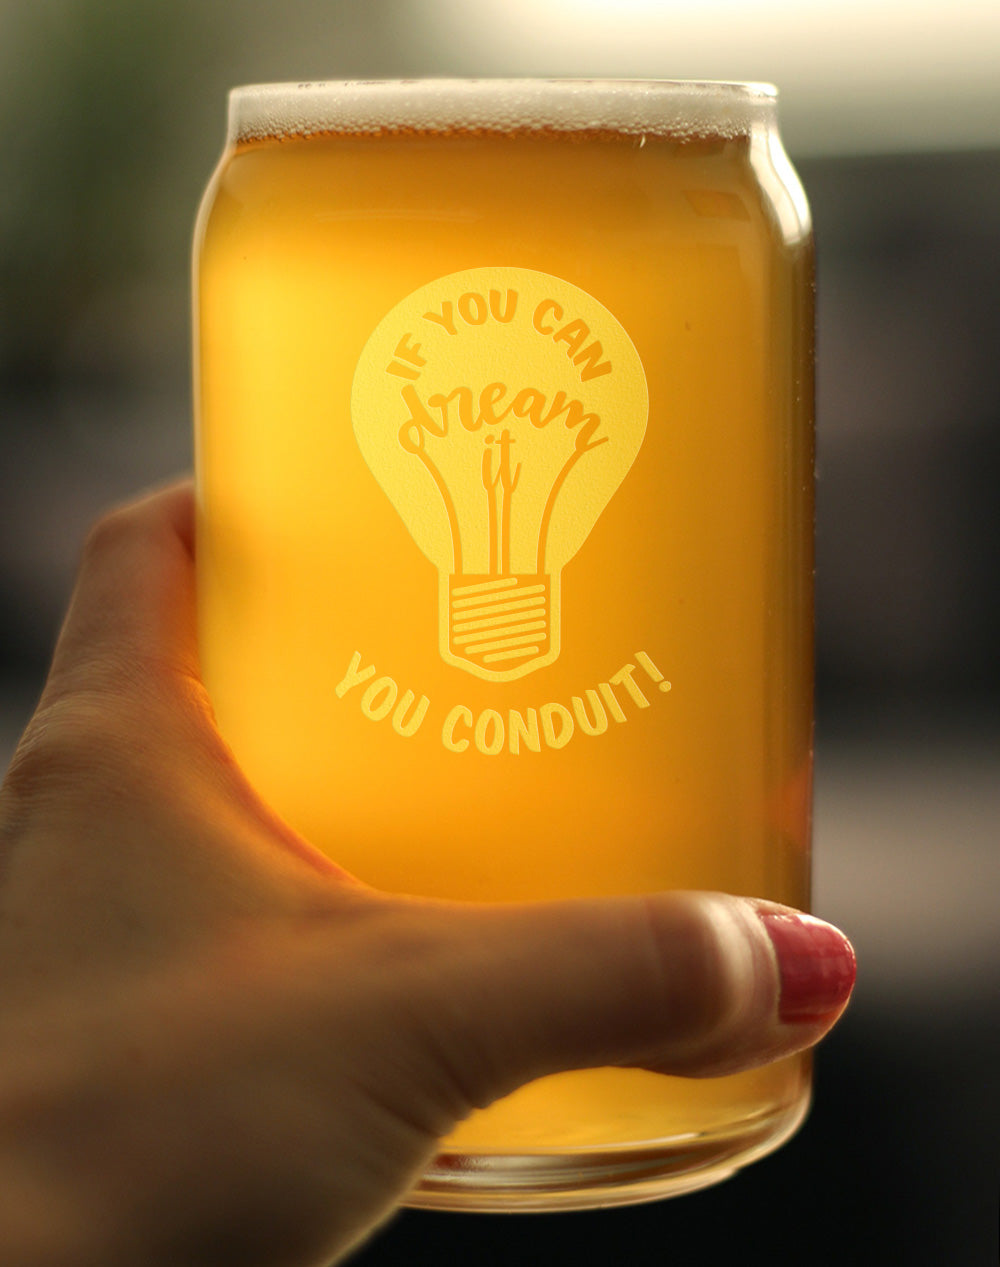 If You Can Dream You Conduit - Beer Can Pint Glass - Funny Electrician Gifts for Journeyman - 16 oz Glass